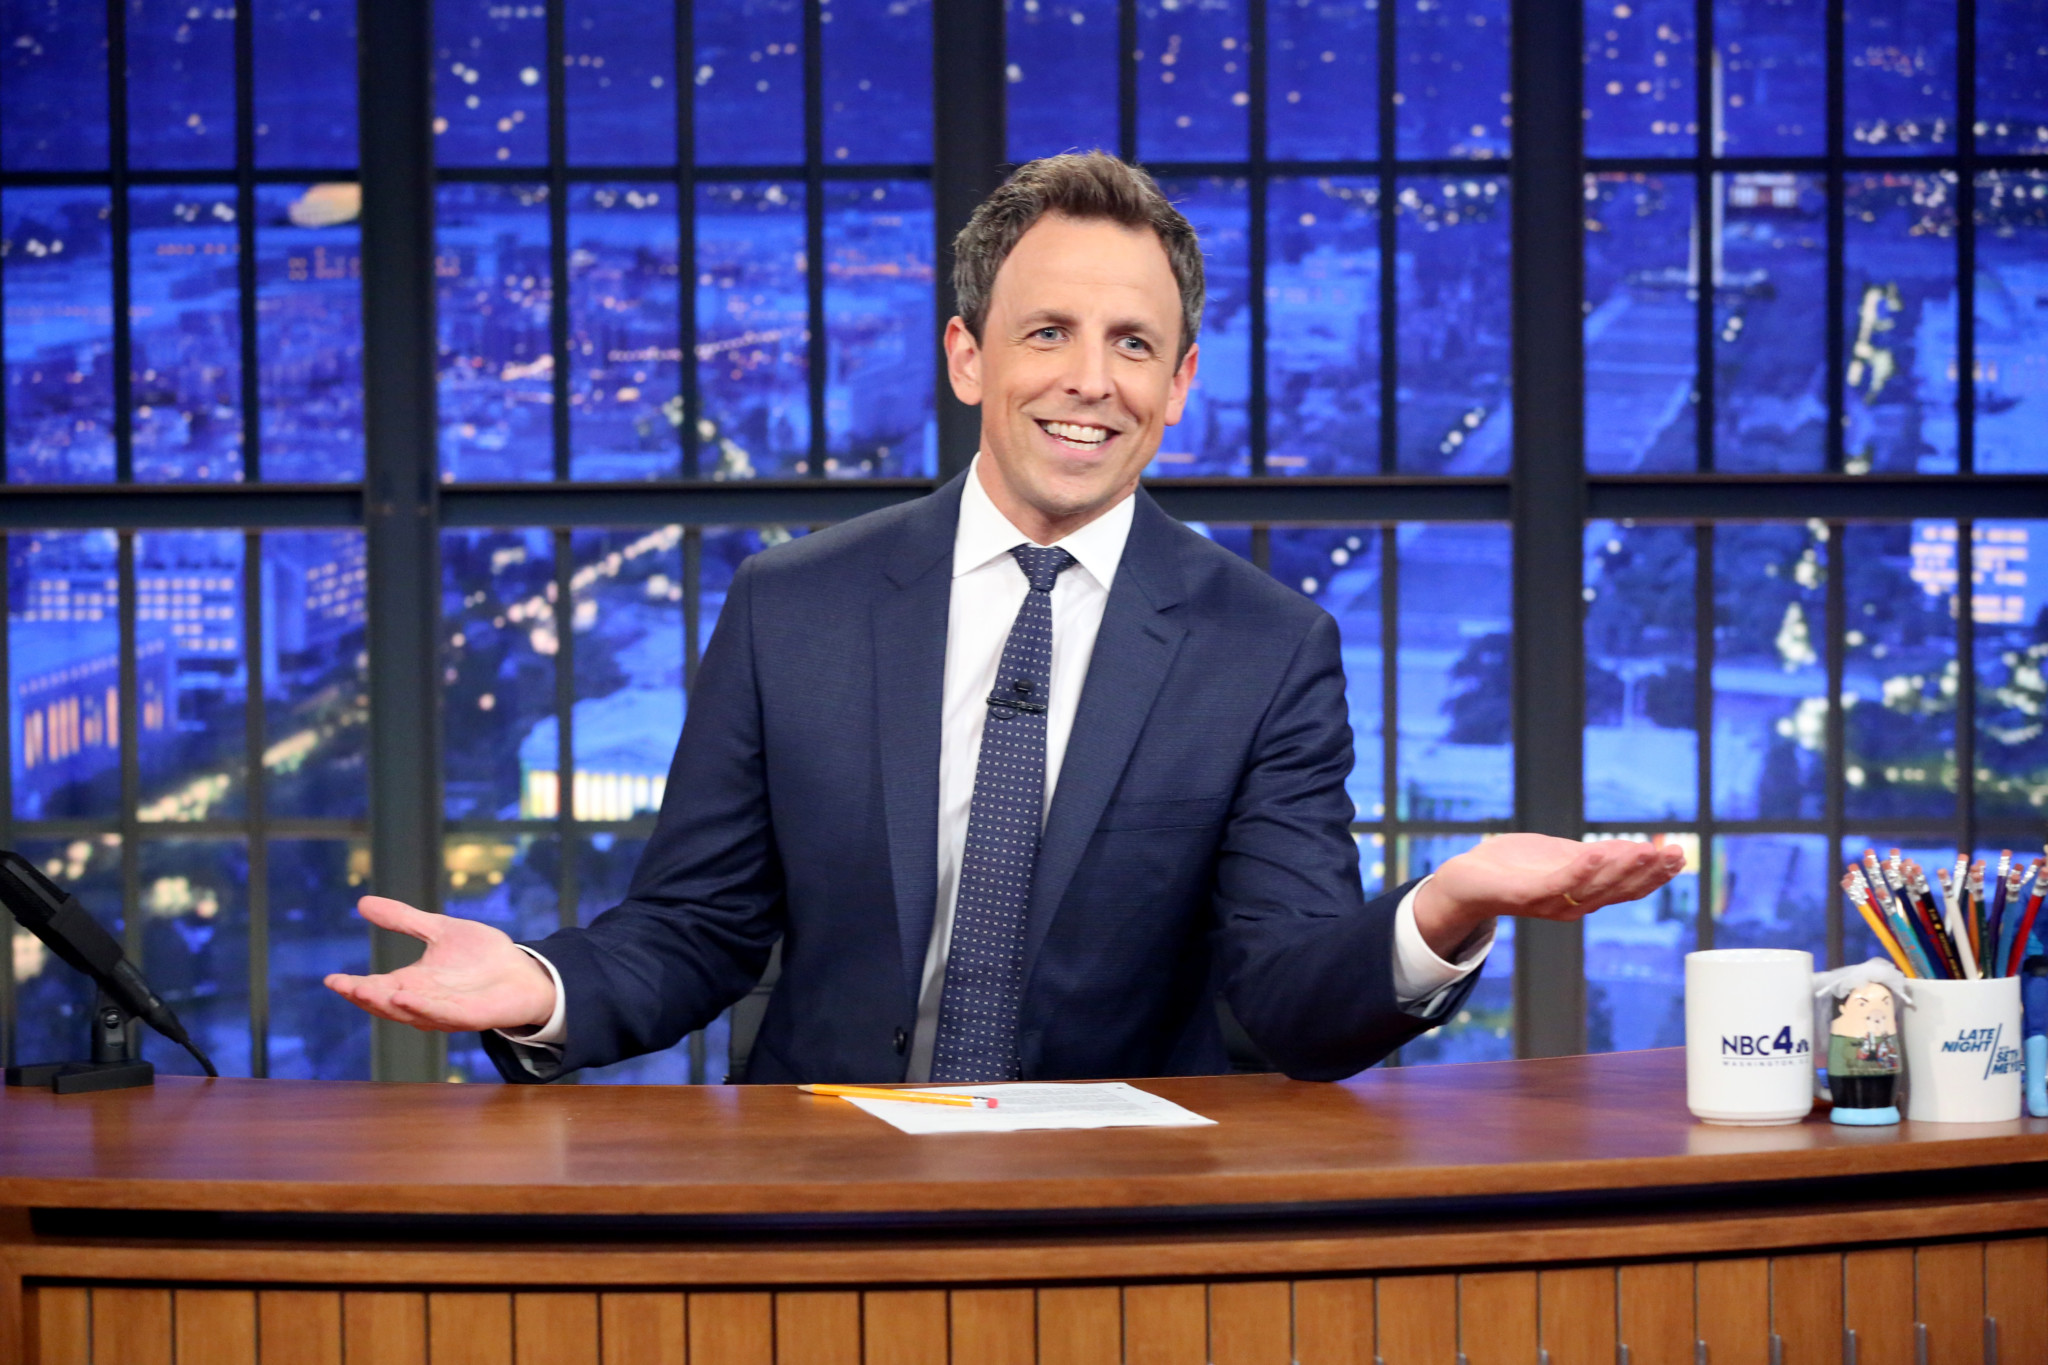 Late Night With Seth Meyers -- Episode 0433 -- Pictured: Host Seth Meyers during the monologue on October 10, 2016 -- (Photo by: Lloyd Bishop/NBC)